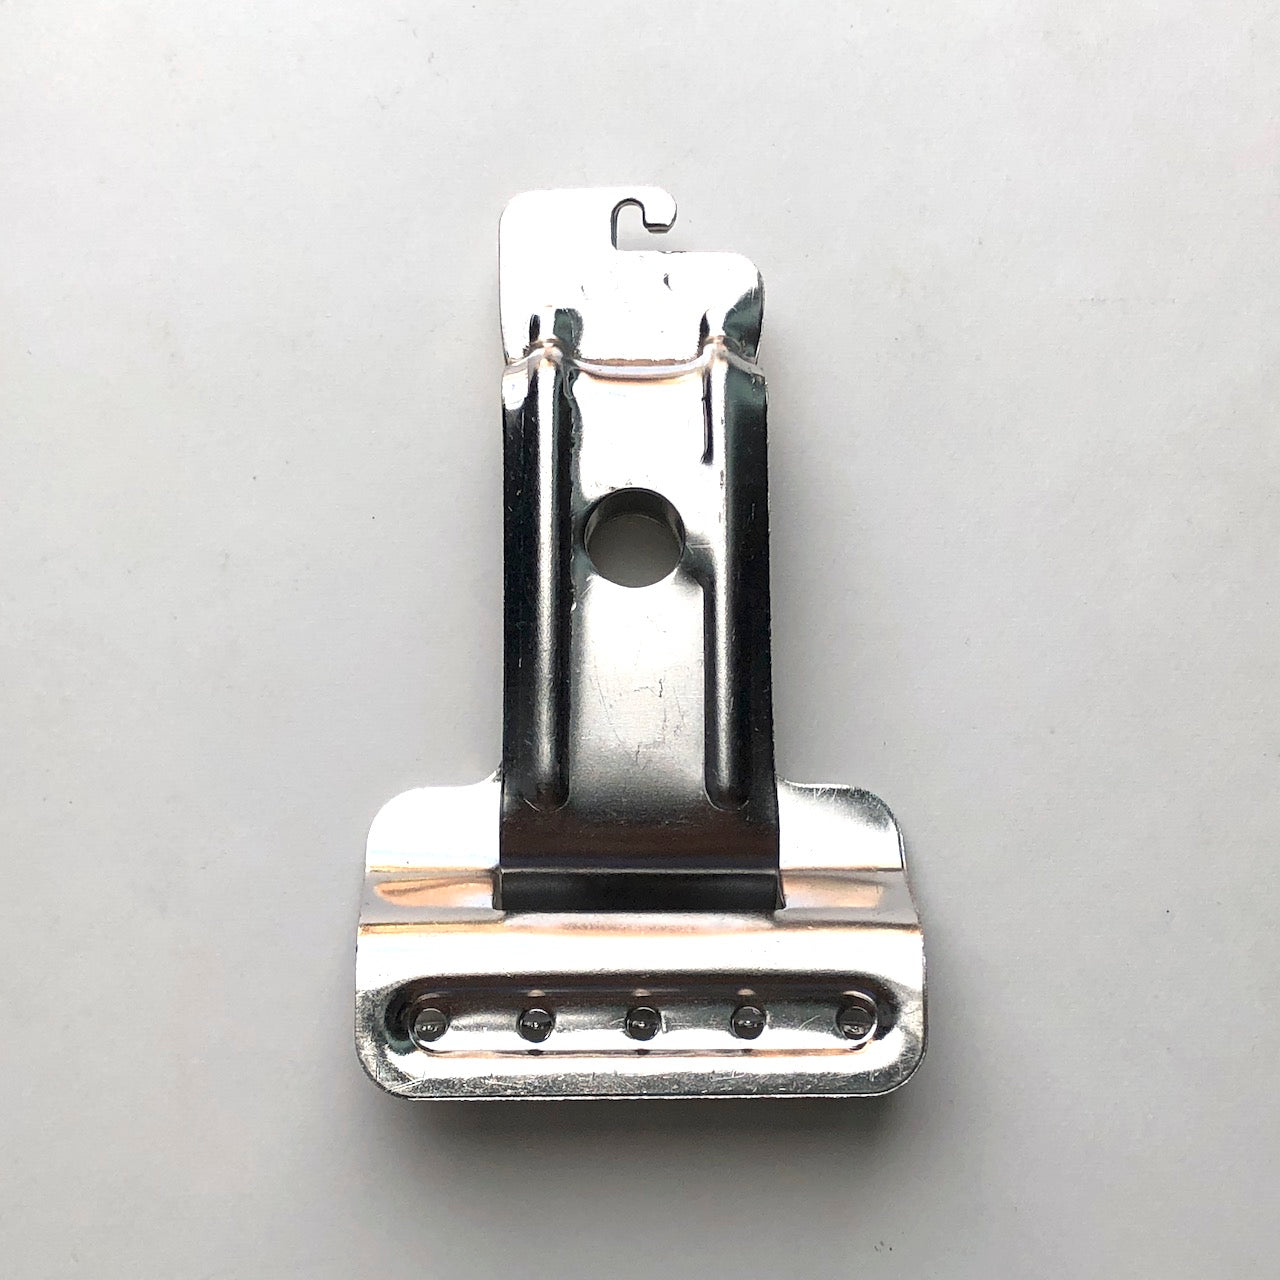 Stainless steel film clips